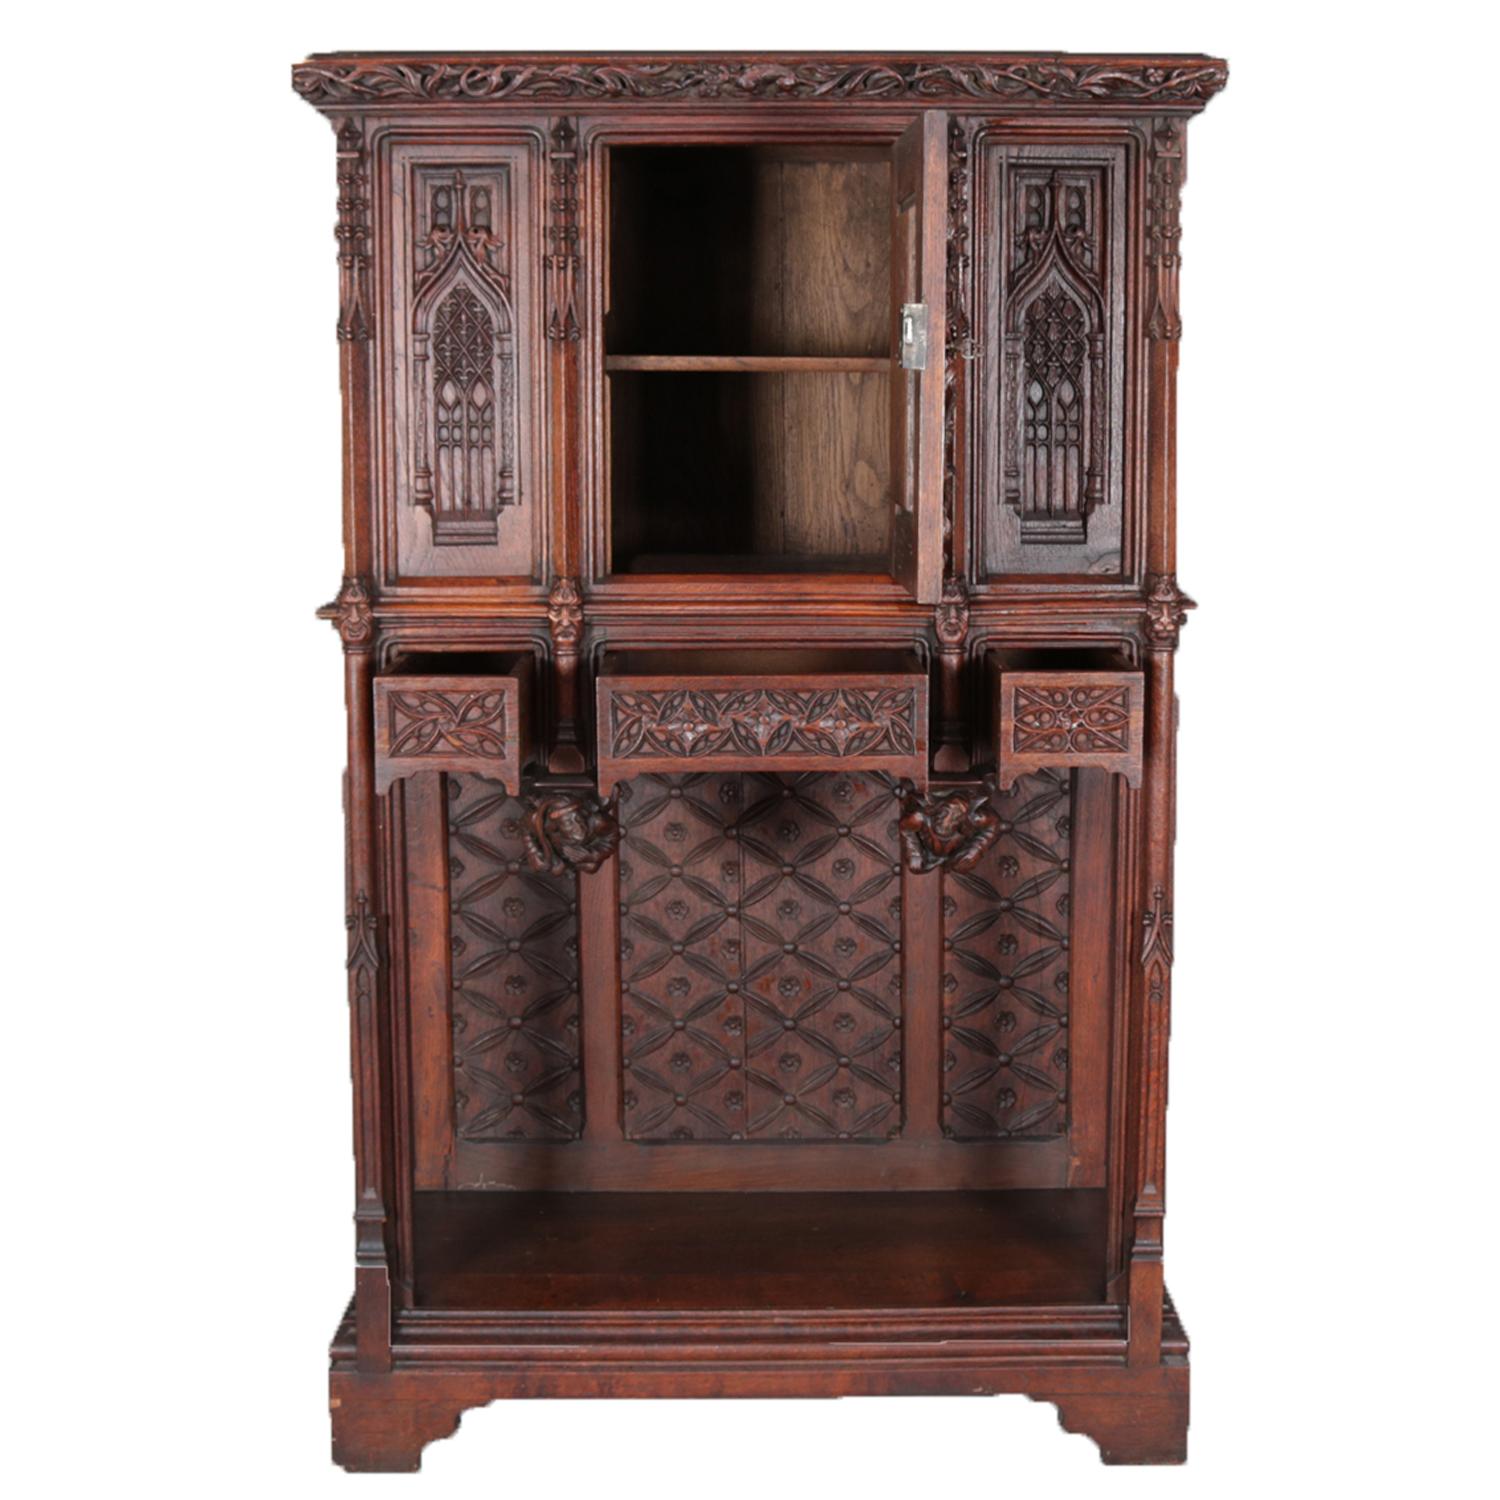 European Antique Gothic Revival Heavily Carved Oak Figural & Pictorial Cabinet circa 1880